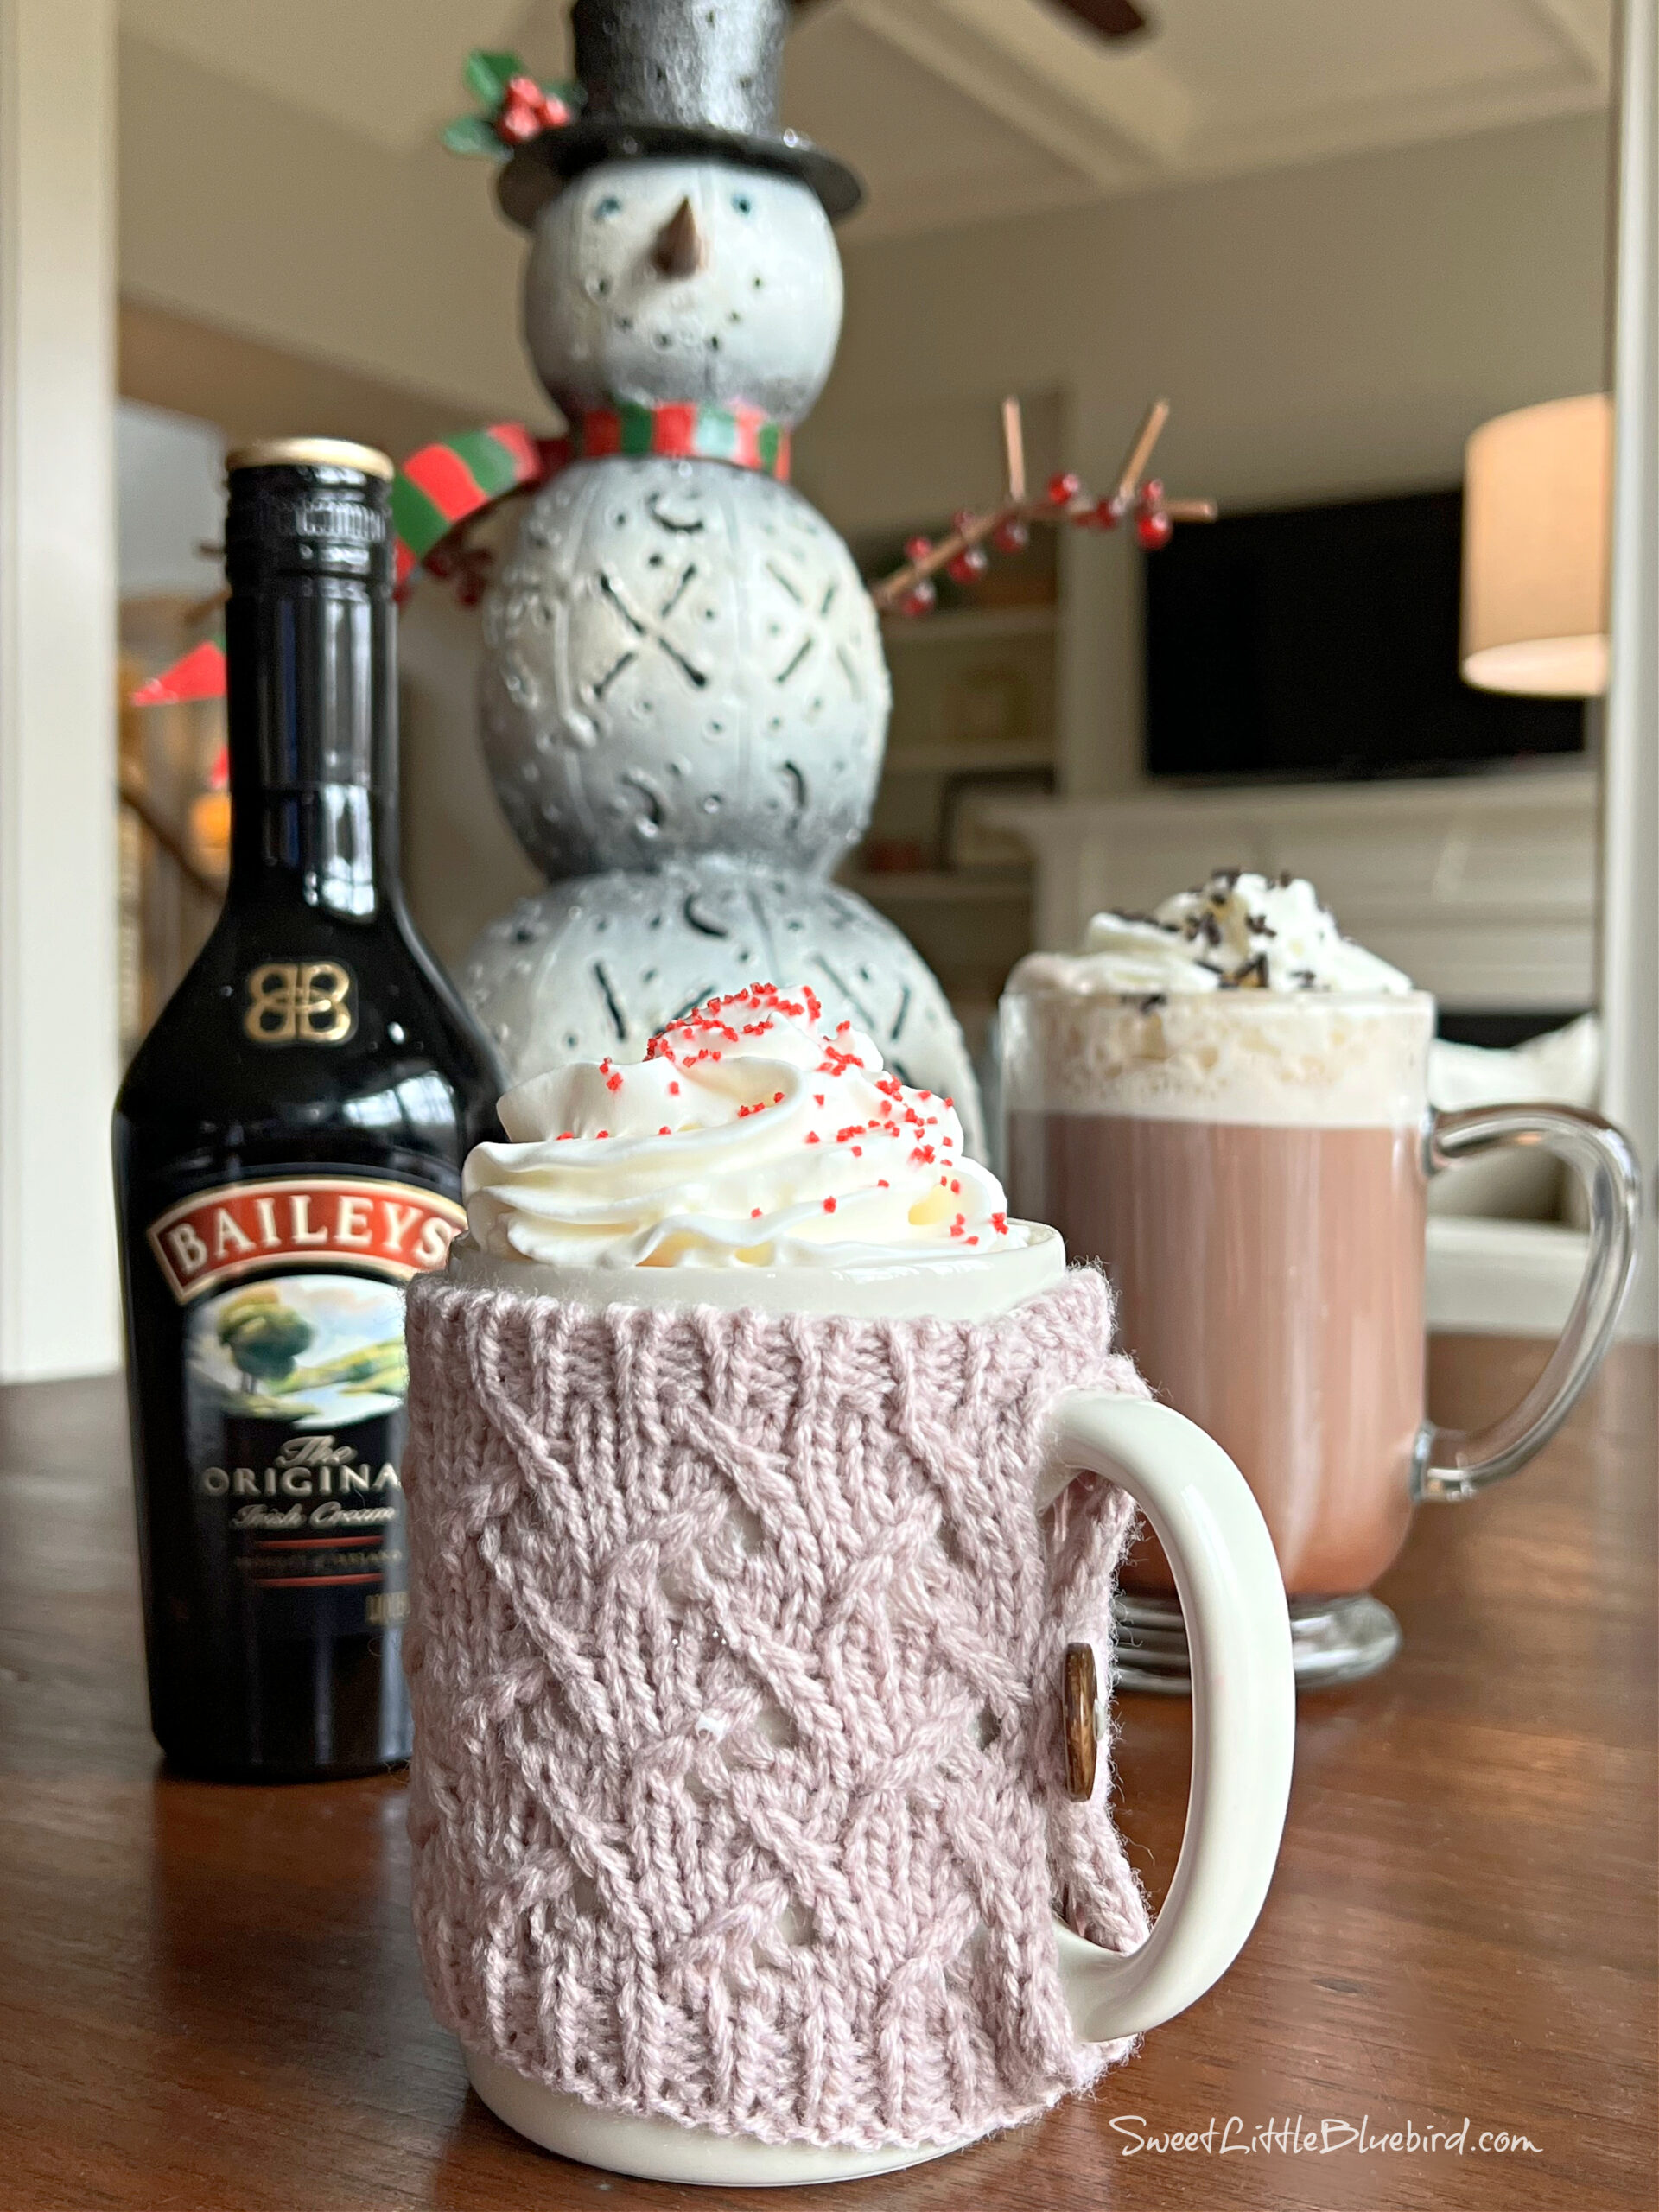 This photo shows the drink served in a mug with whipped cream and red sprinkles. Behind the mug is another drink in a clear glass mug next to a snowman figurine and a bottle of Baileys Irish Crème. 